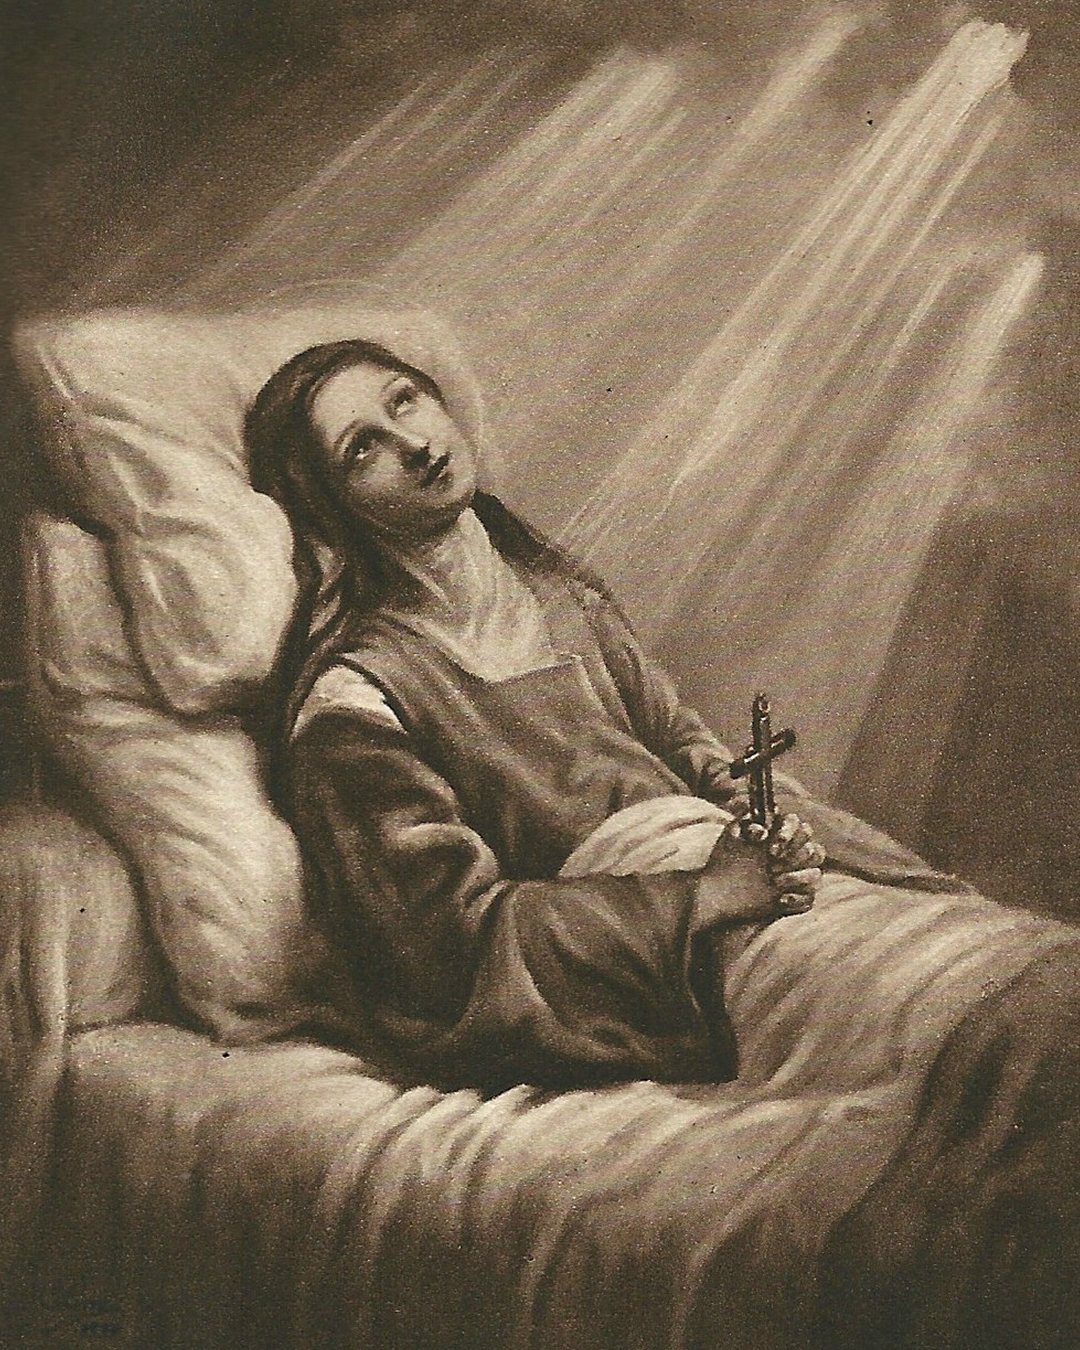 Painting of St. Therese on her death bed, looking up to rays of light shining down from a cloudy sky.